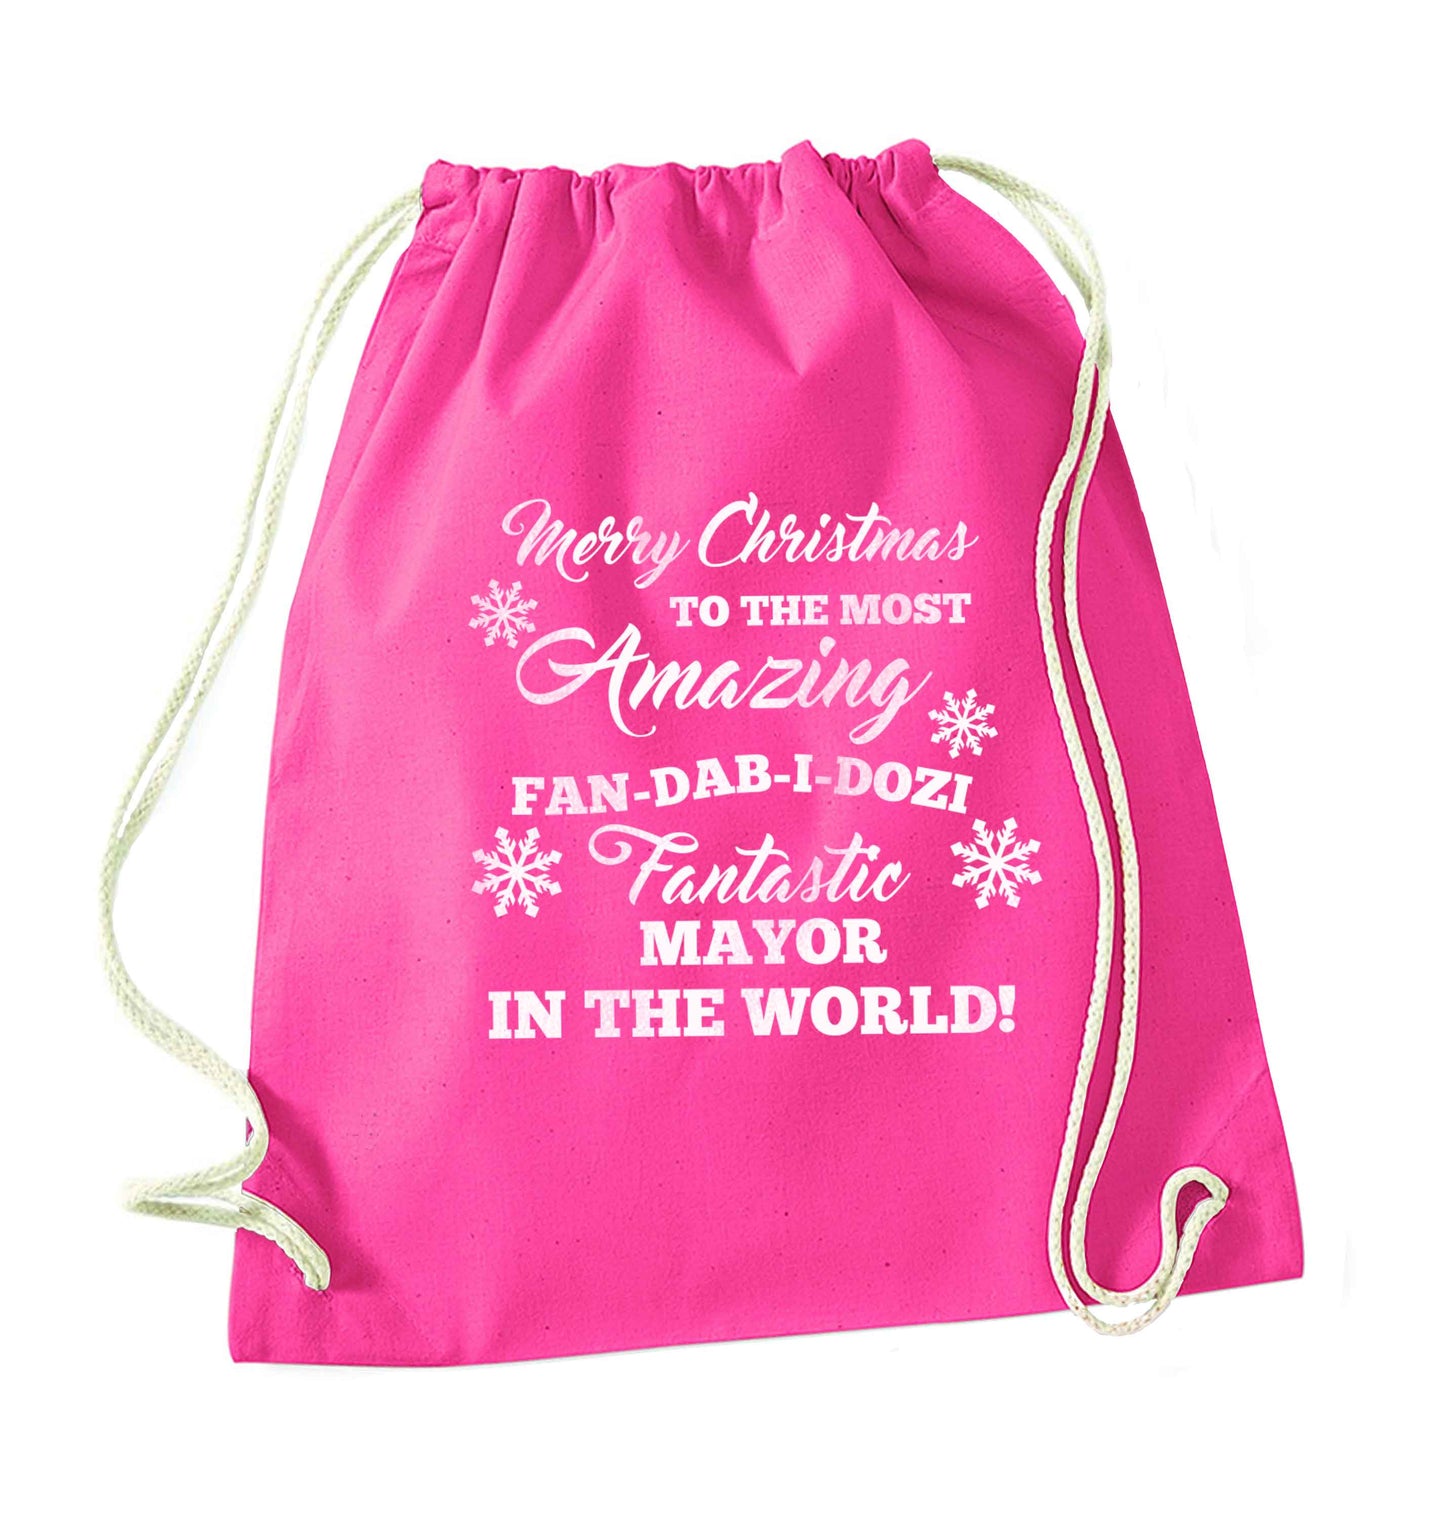 Merry Christmas to the most amazing fireman in the world! pink drawstring bag